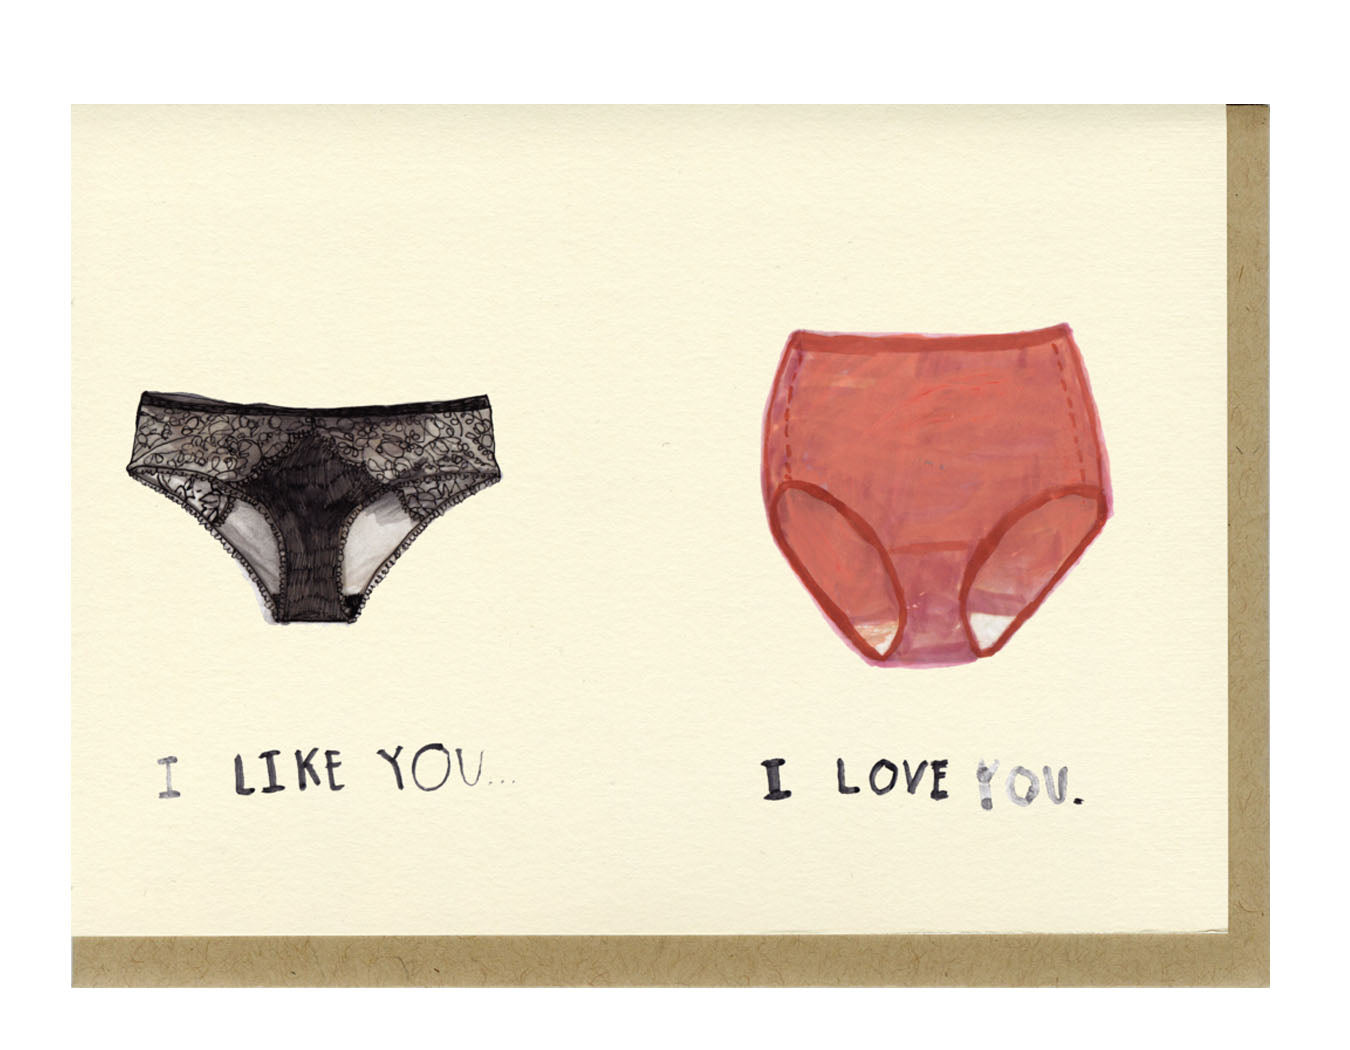 cream colored background black lacy panties underneath says i like you red granny panties underneath says i love you